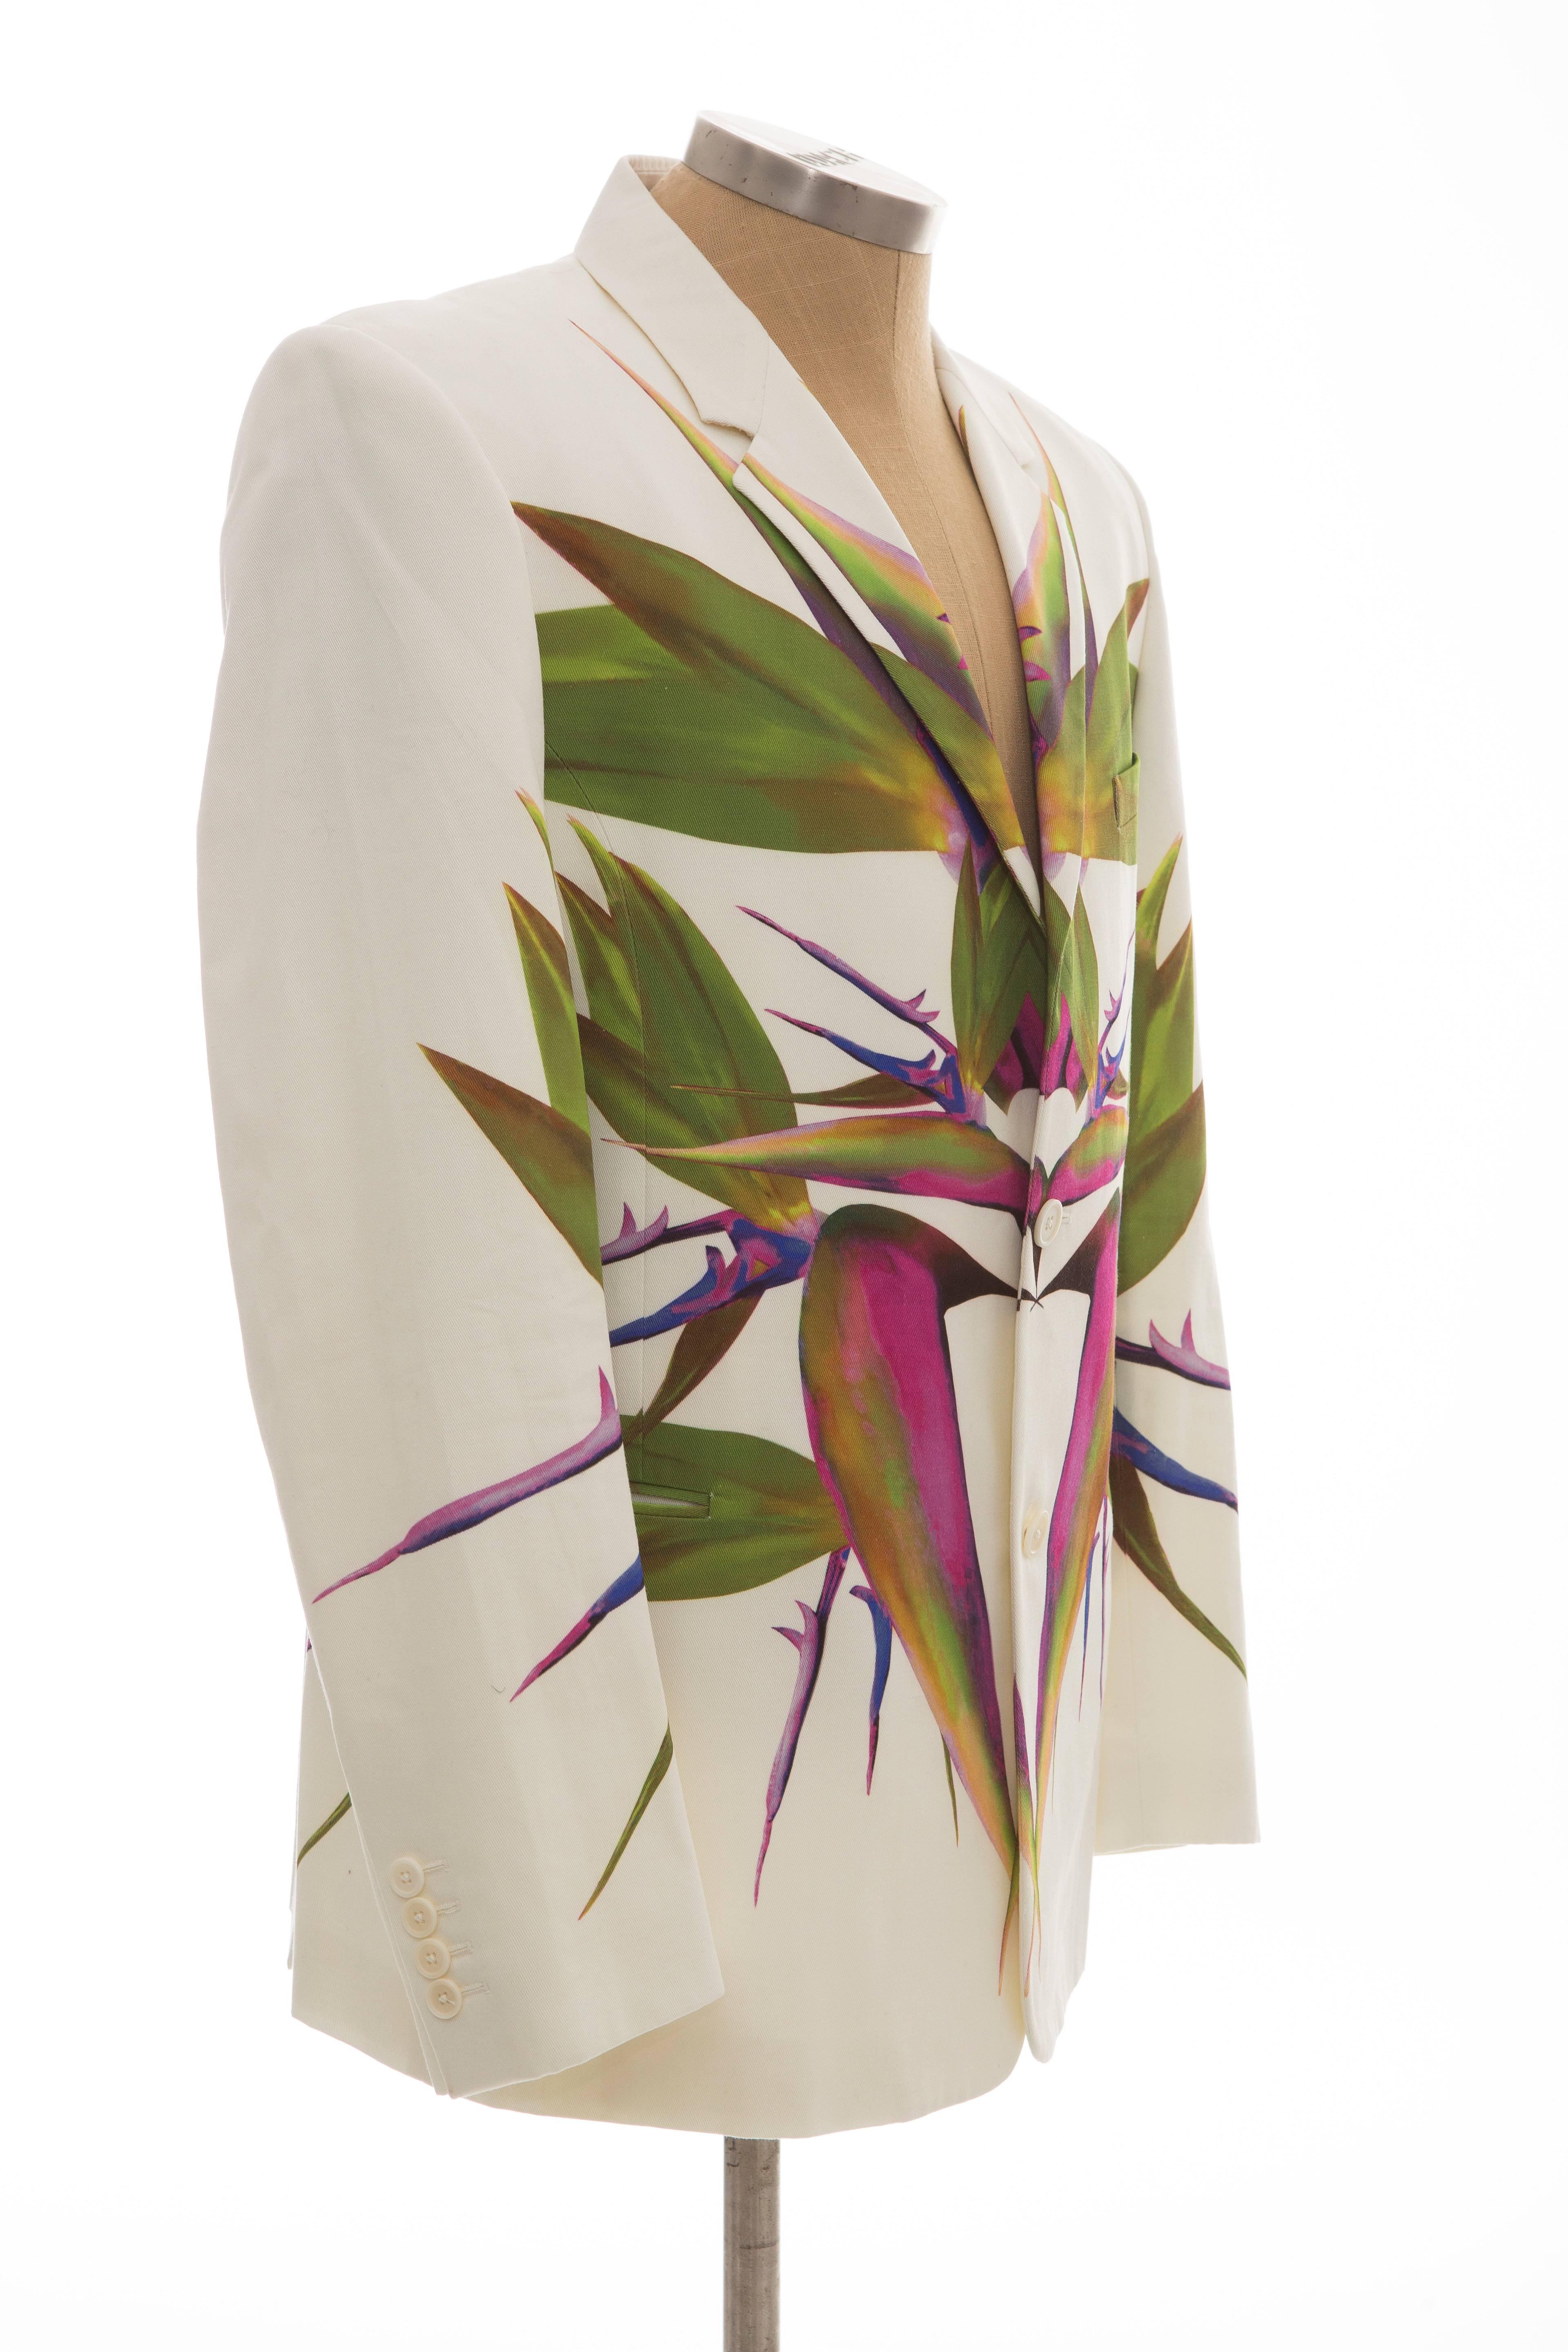 Givenchy by Riccardo Tisci, Spring-Summer 2012 men’s ivory birds of paradise printed blazer with narrow fish mouth lapel, two vents at back, pockets at sides and at interior and button closures at center front.

IT. 54
US. 44

Chest 44”,